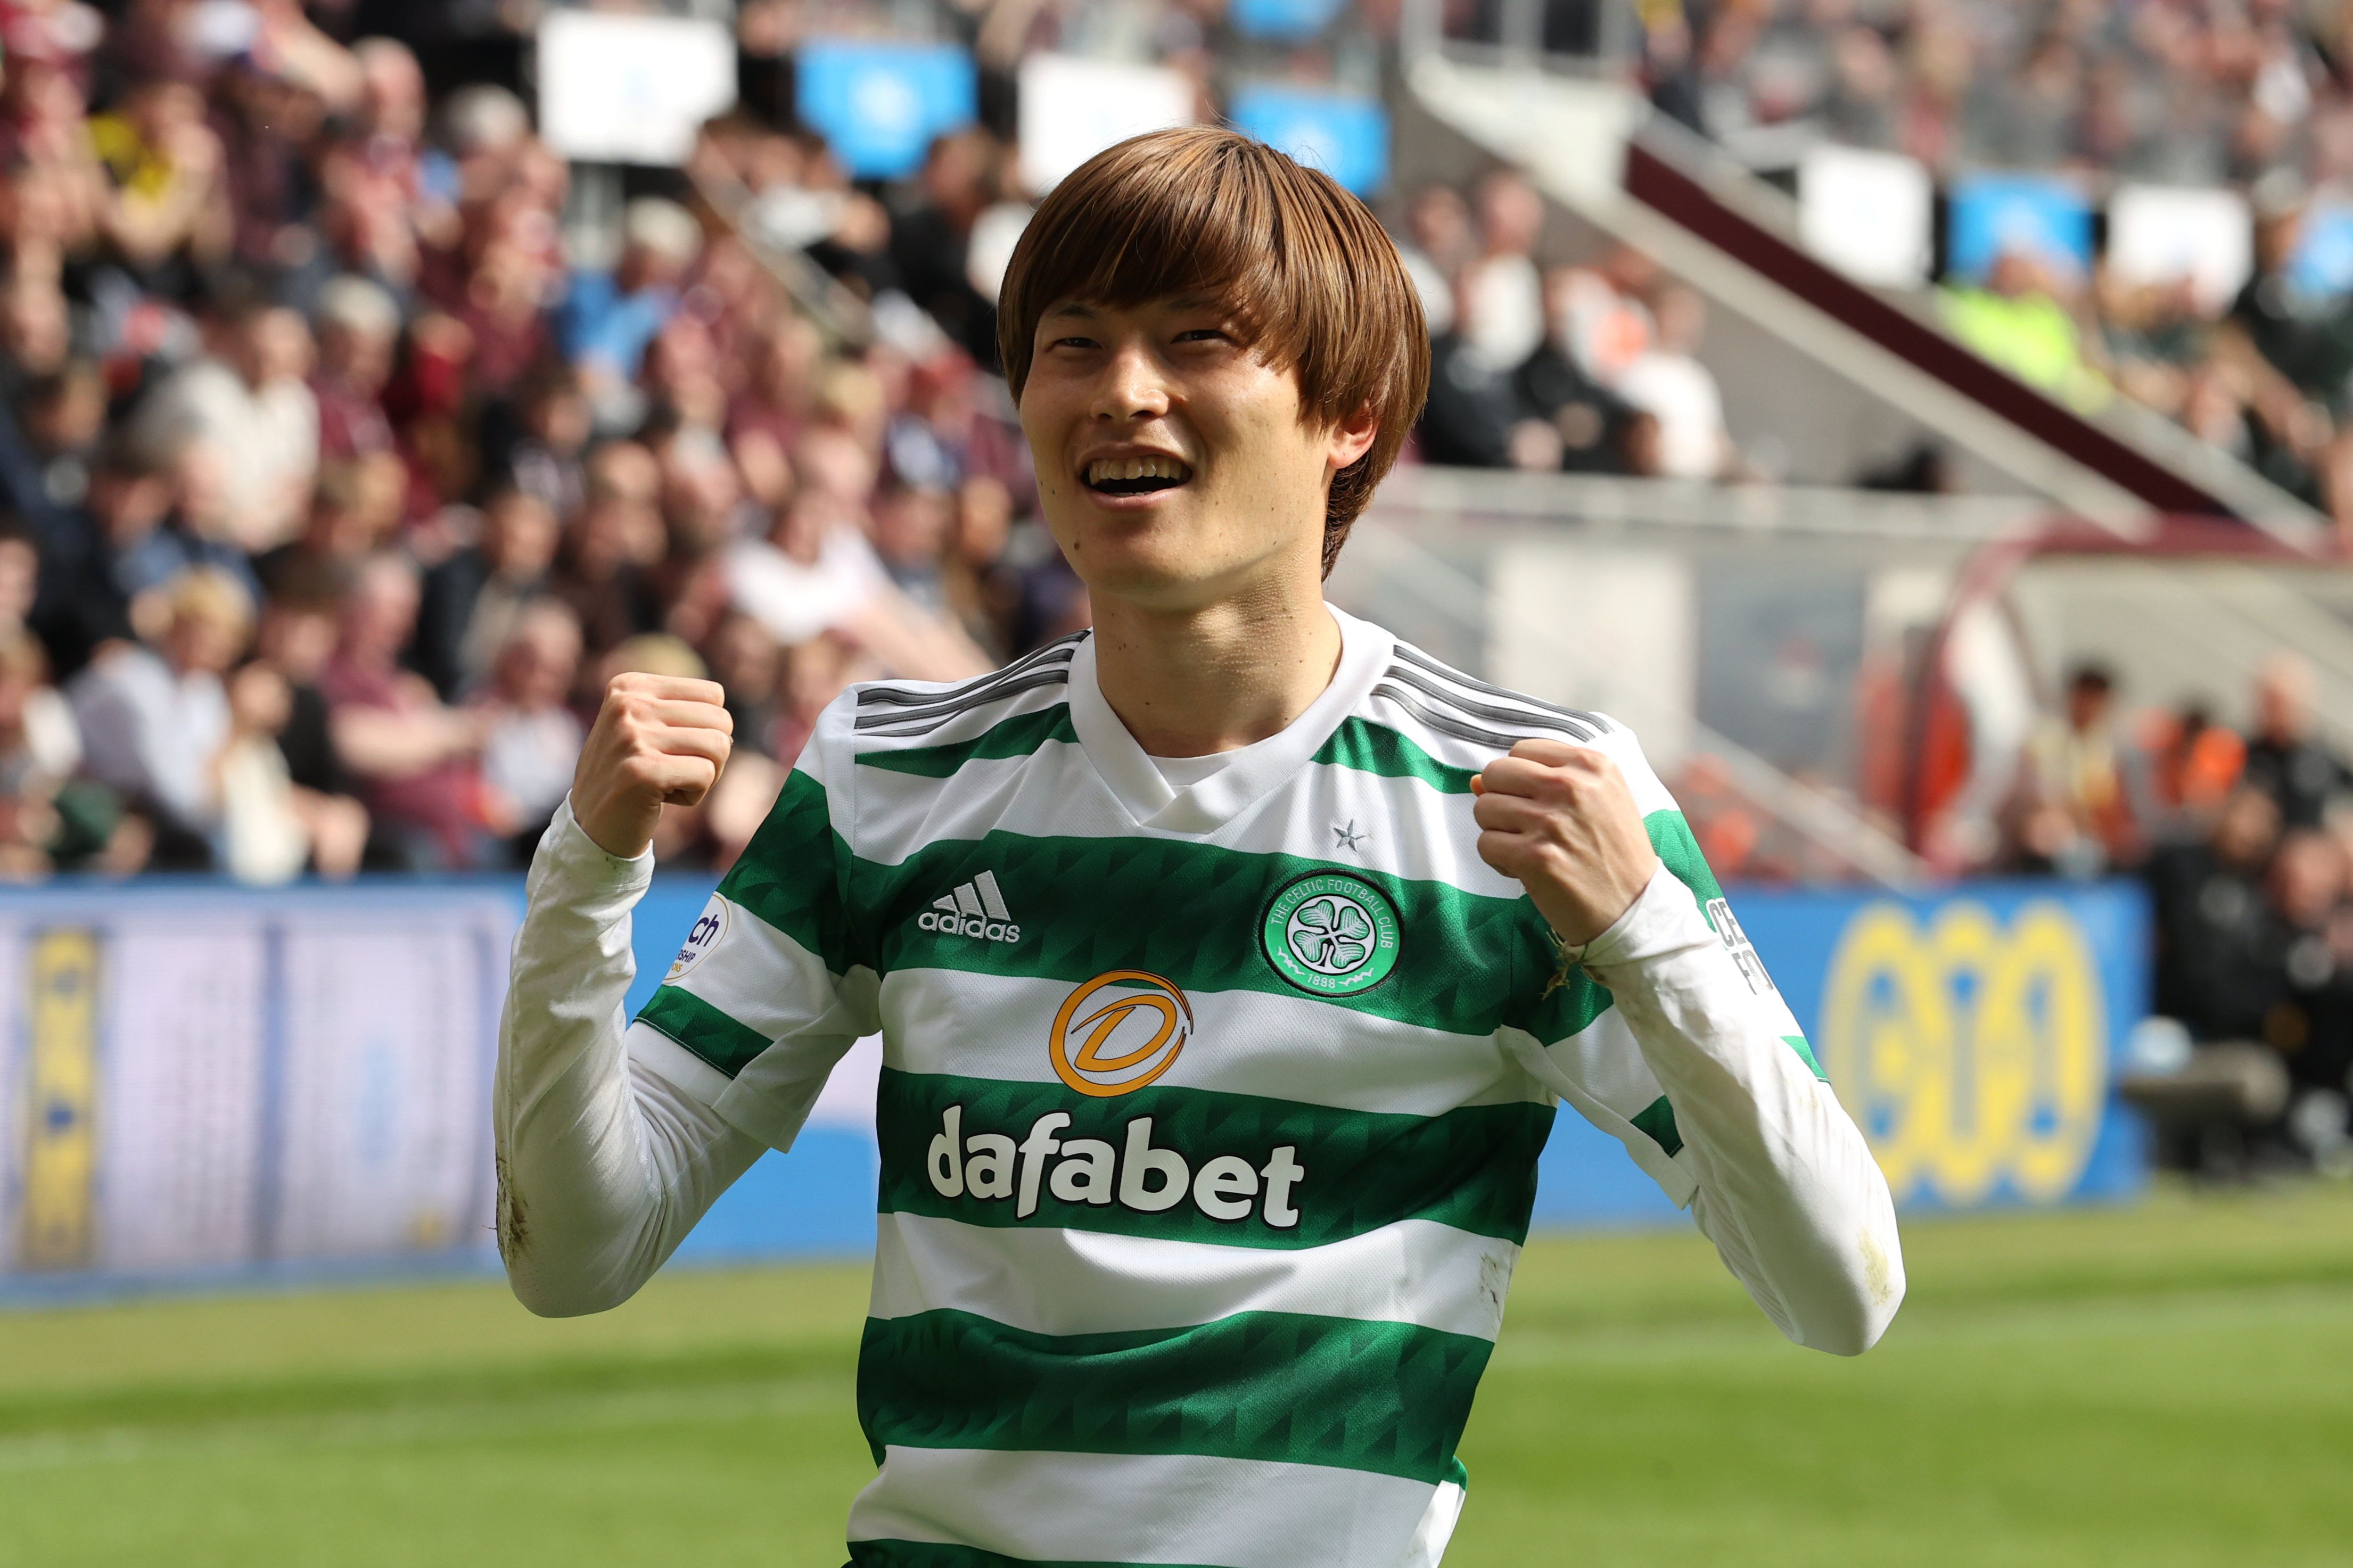 The top scorer in J-League, Kyogo Furuhashi, is heading to Celtic